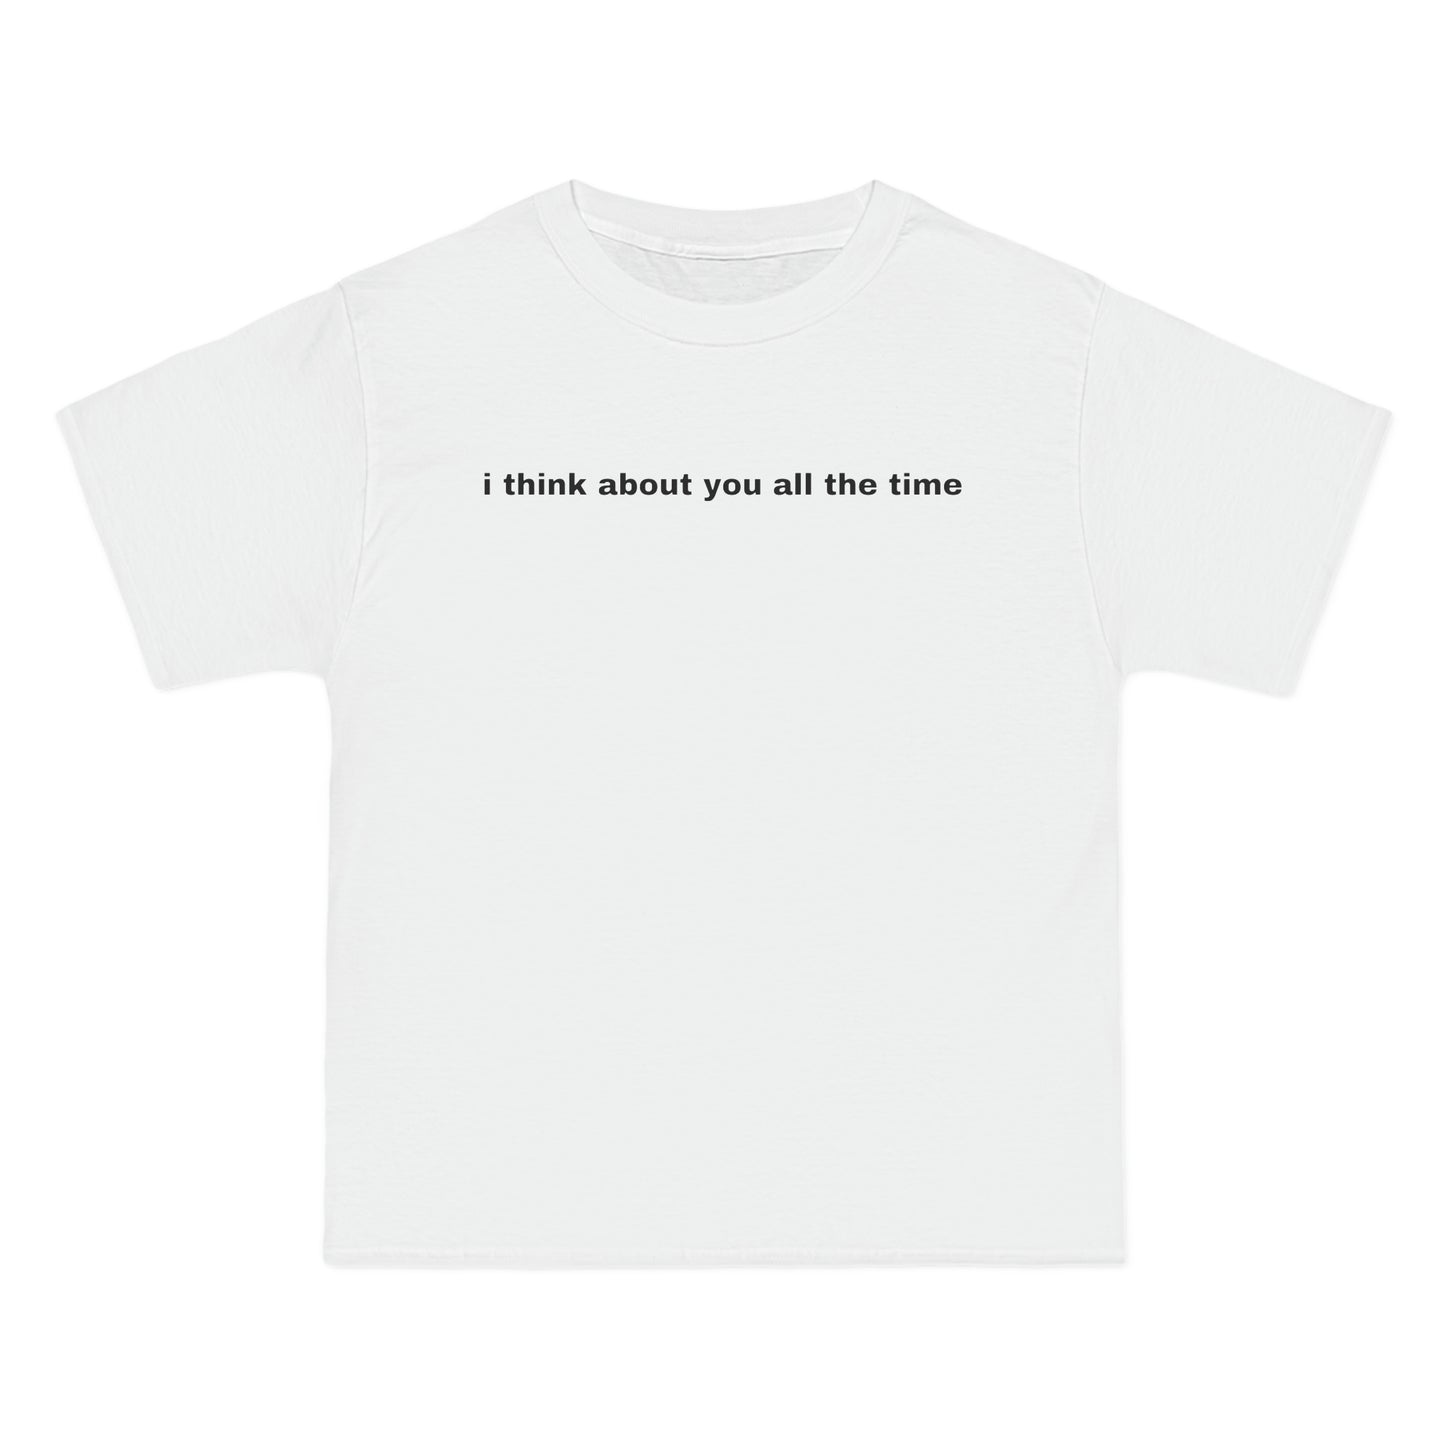 i think about you all the time Tee